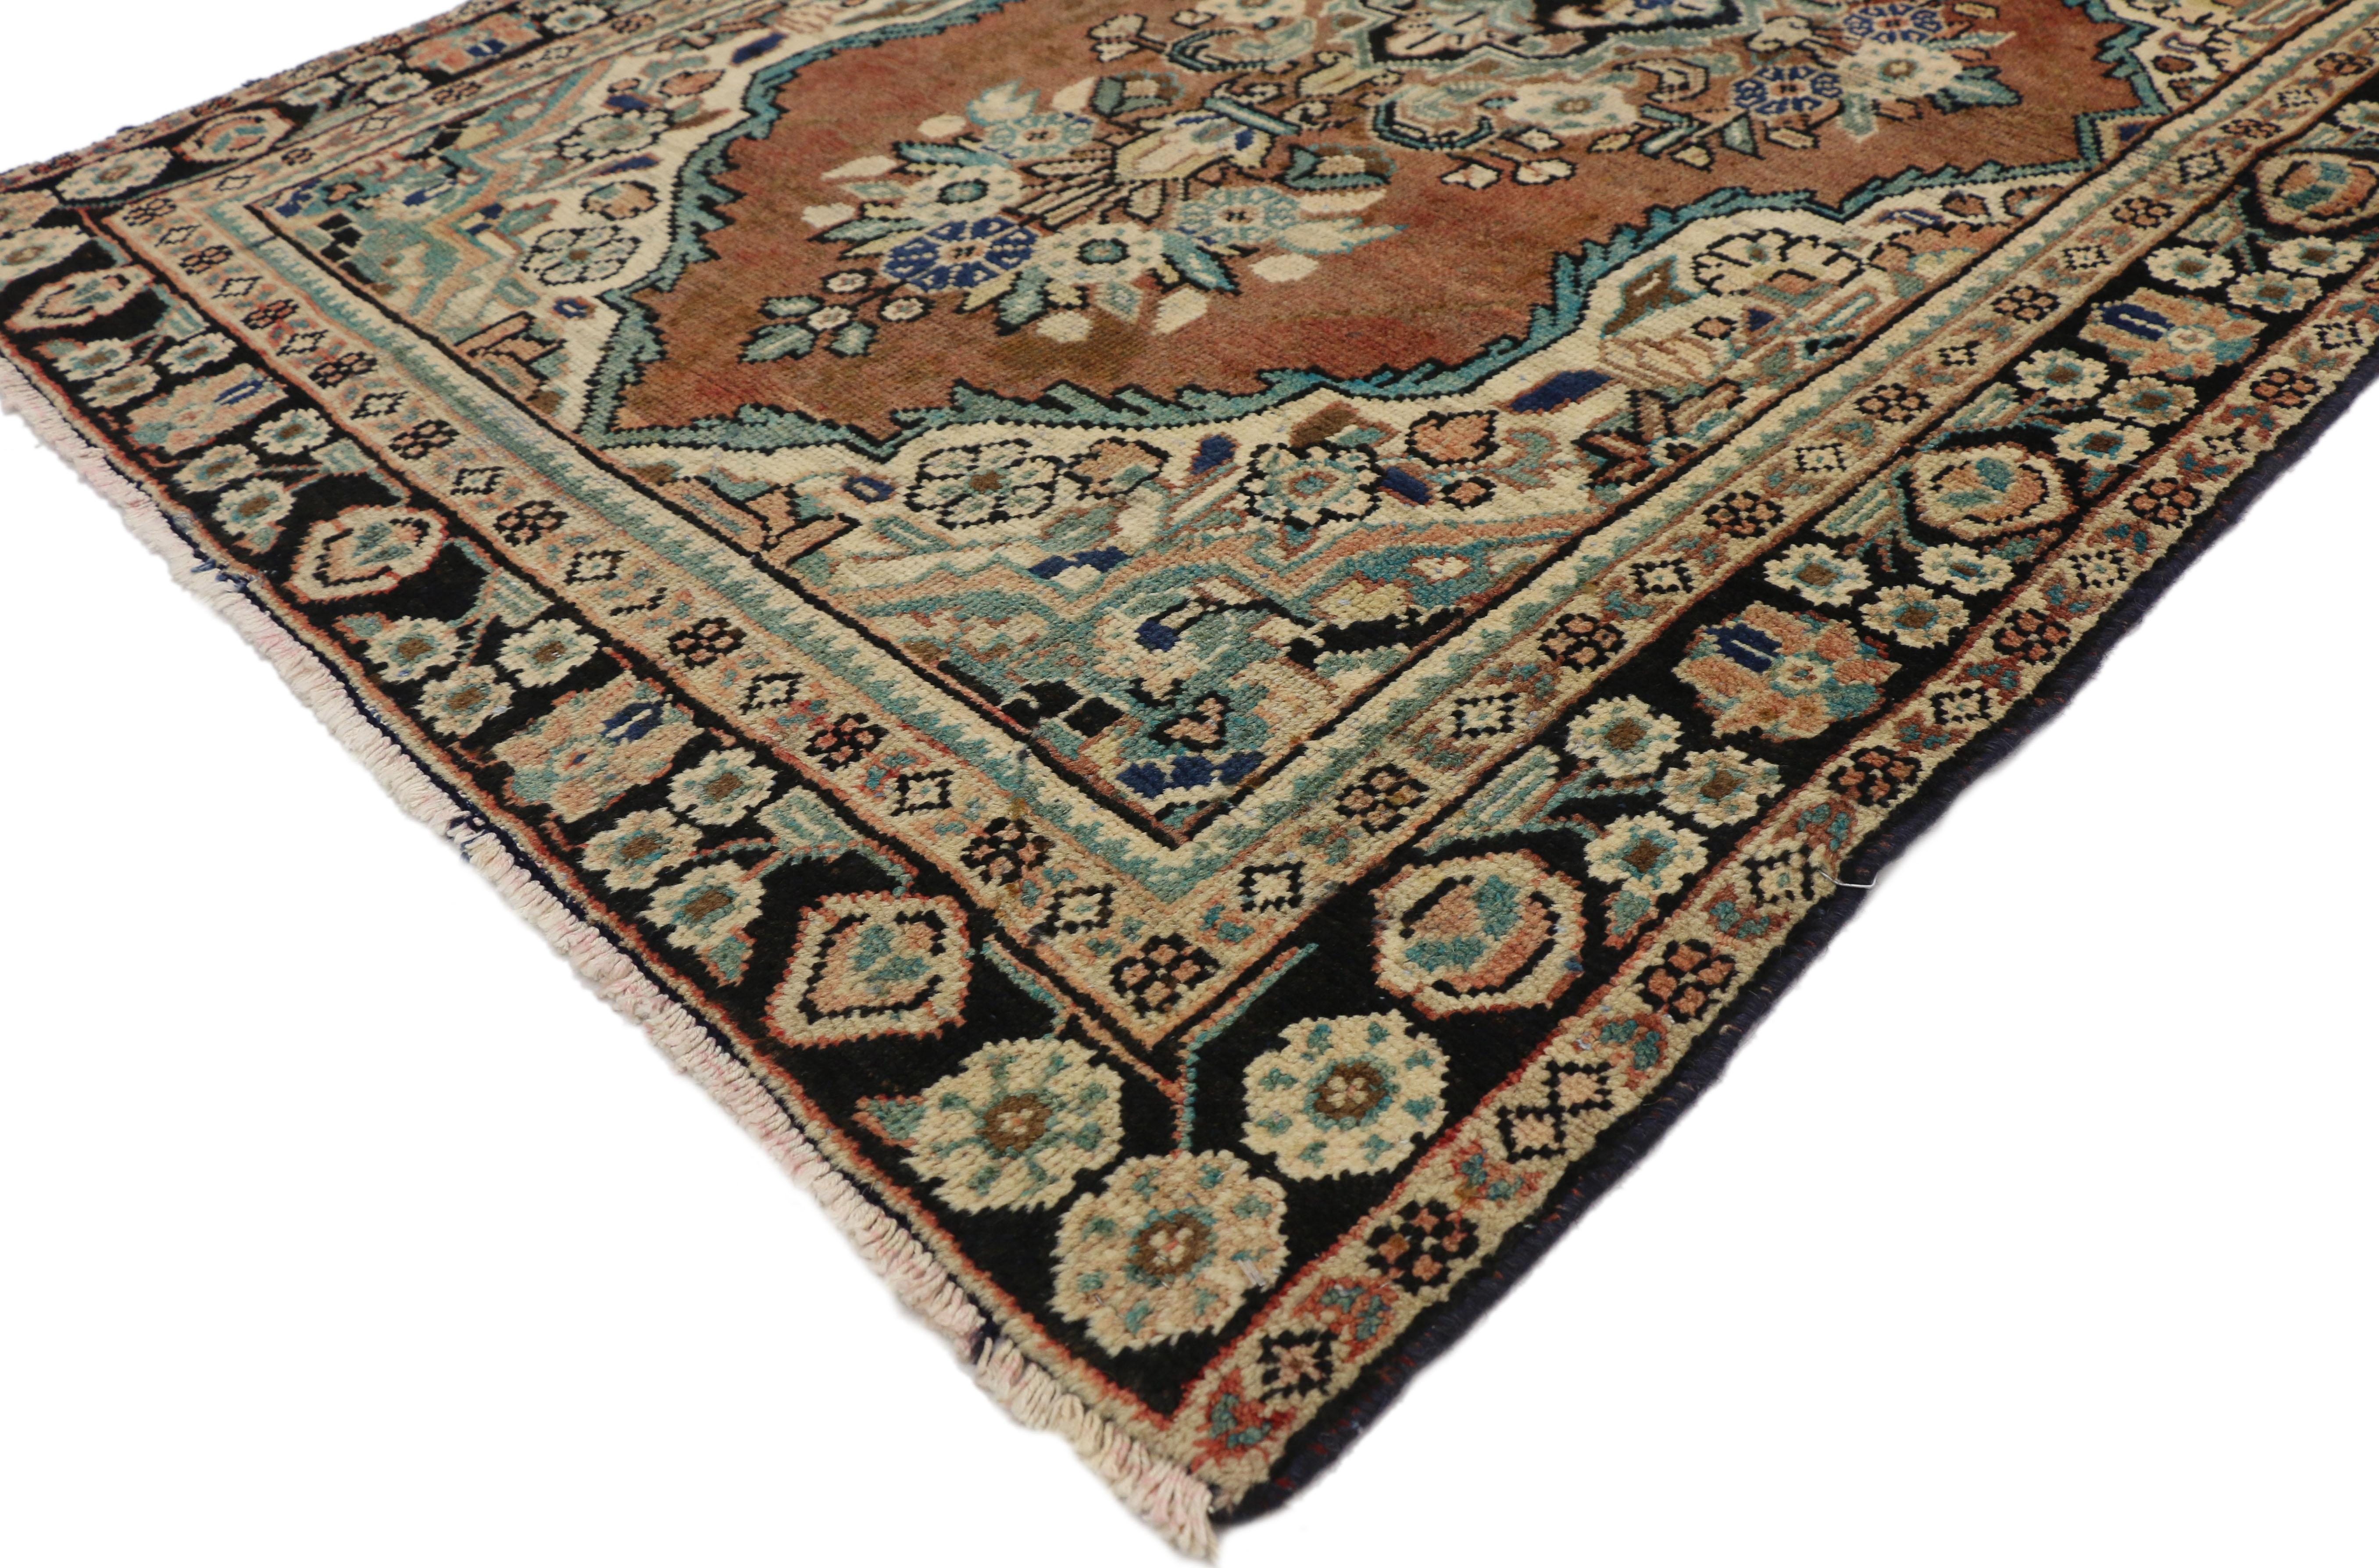 75182 Vintage Persian Mahal Rug with Rustic English Country Cottage Style 04'04 x 06'05. Boasting a floral bounty in a range of warm hues, this vintage Persian Mahal rug is a delightful example of English Country Cottage style. At the center of the